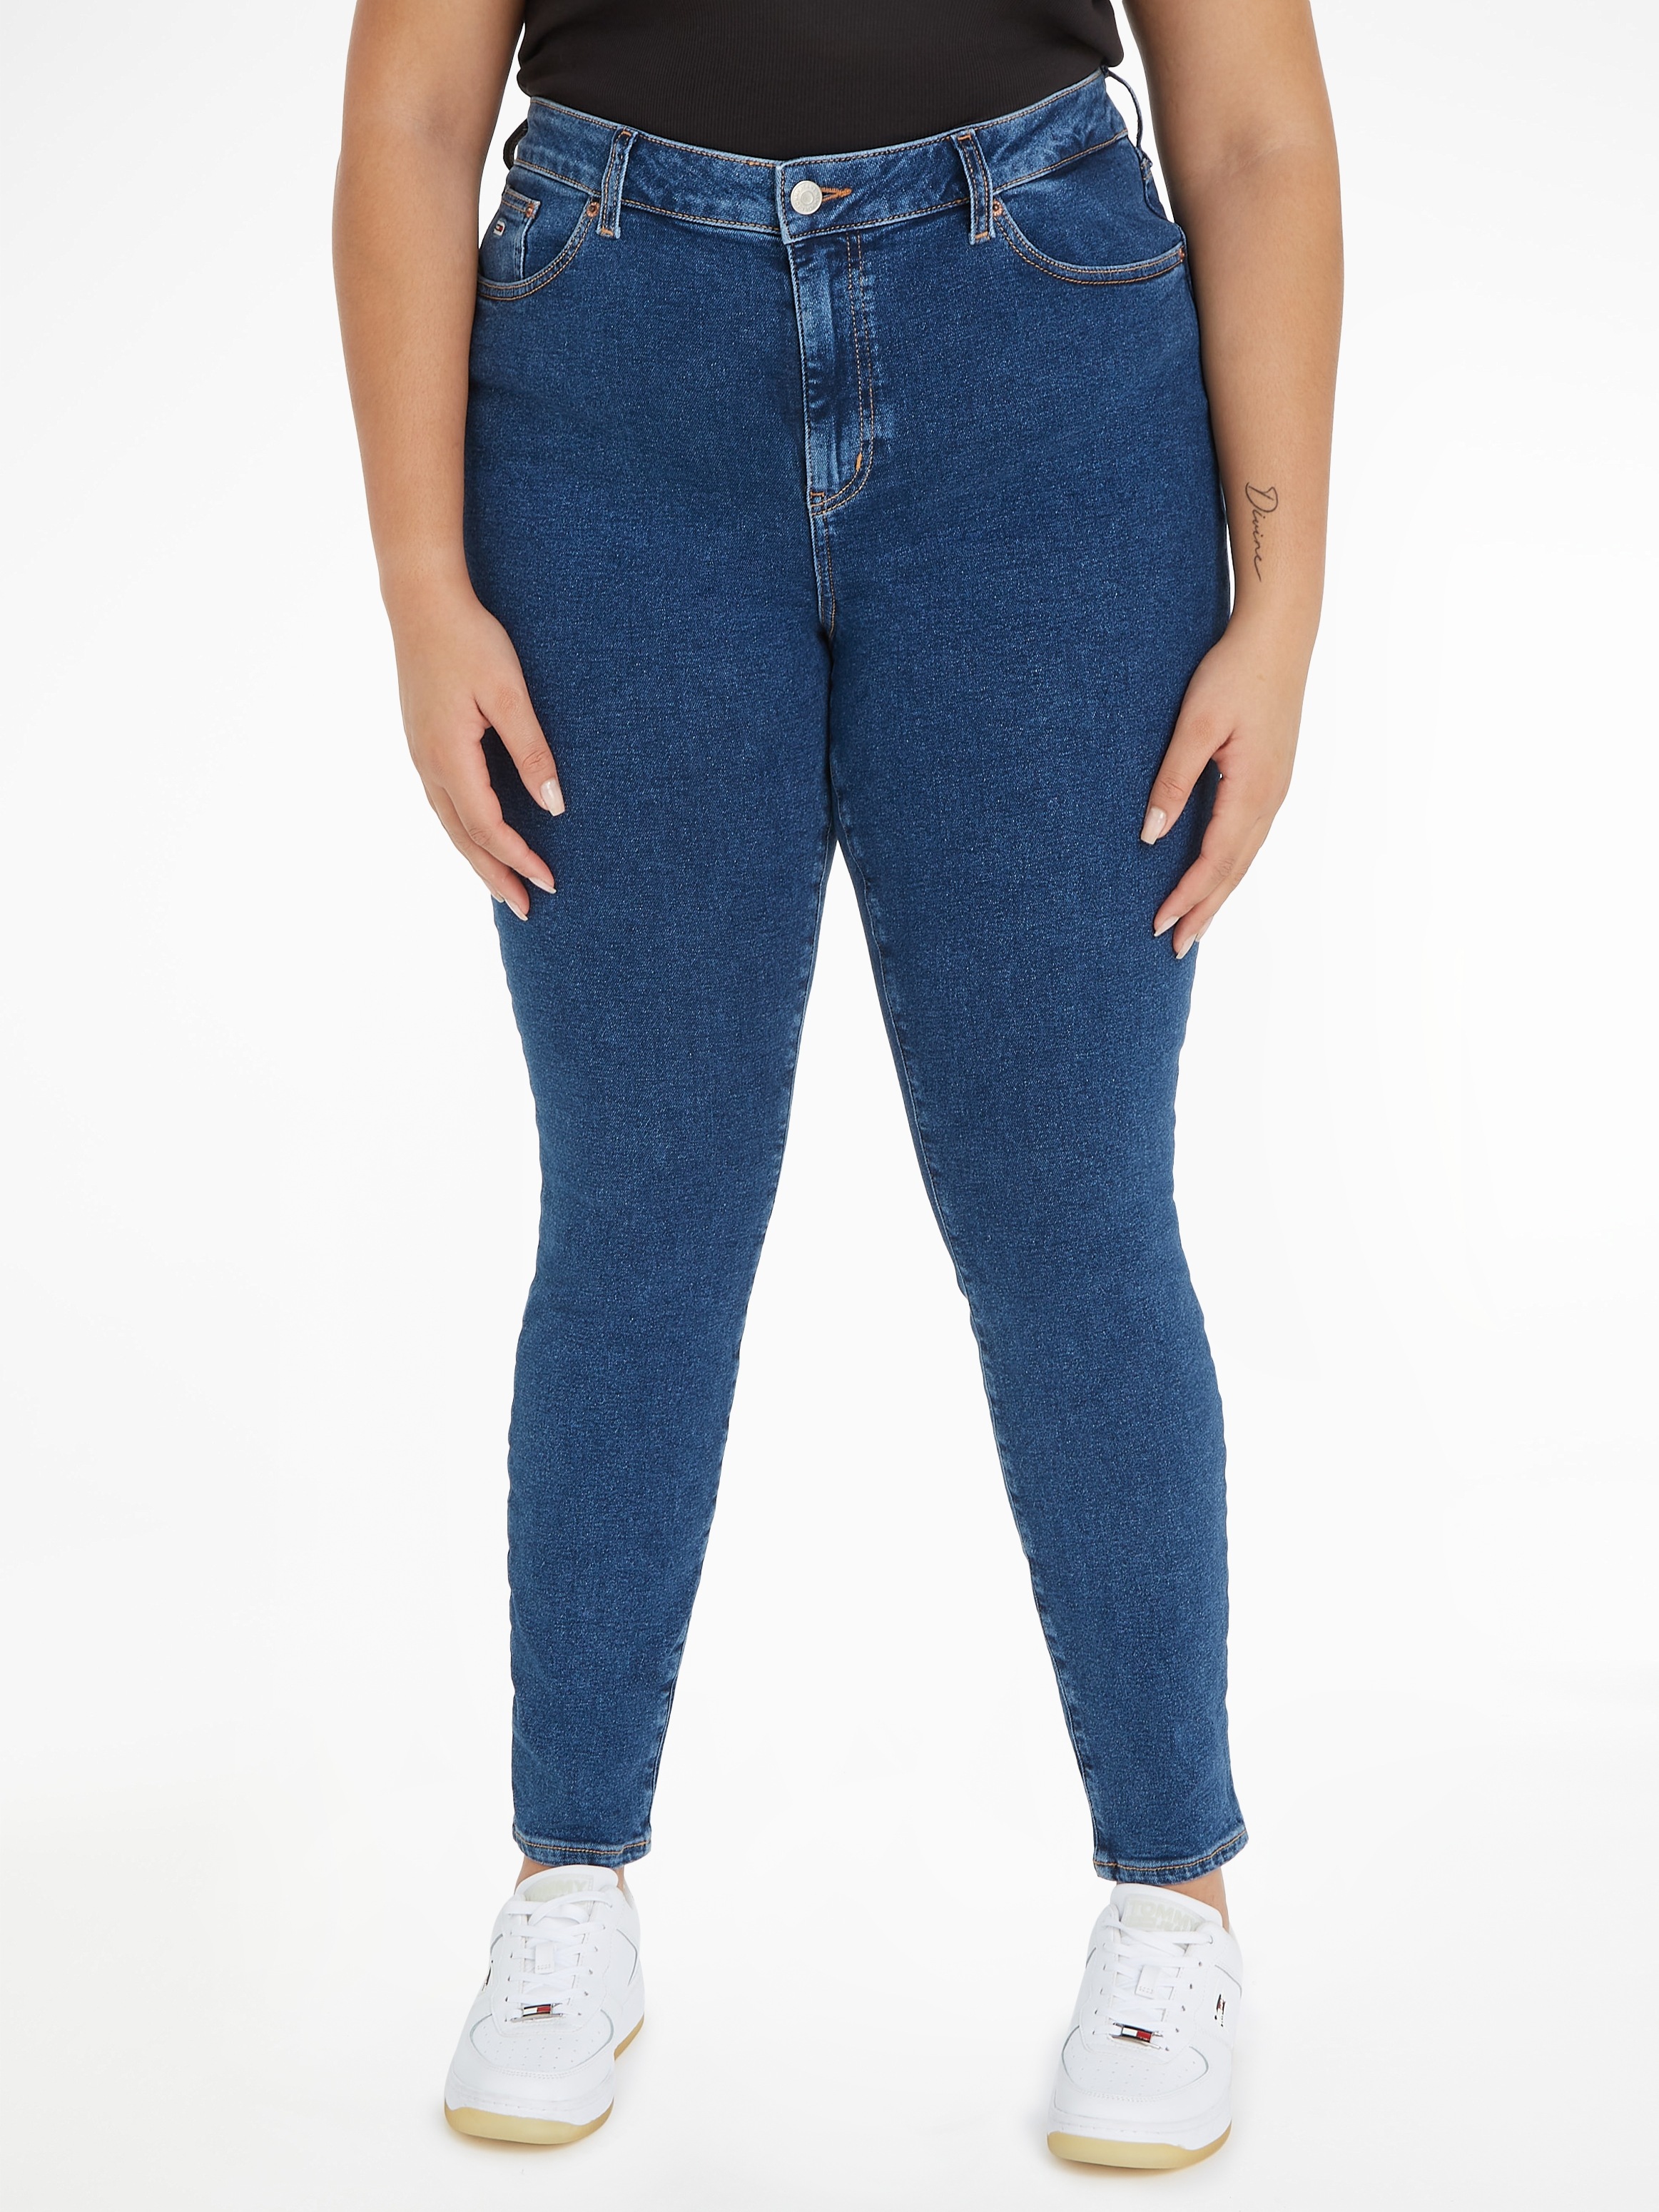 Tommy Jeans Curve Skinny-fit-Jeans, wird bei angeboten OTTOversand CURVE, Jeans SIZE PLUS in Weiten